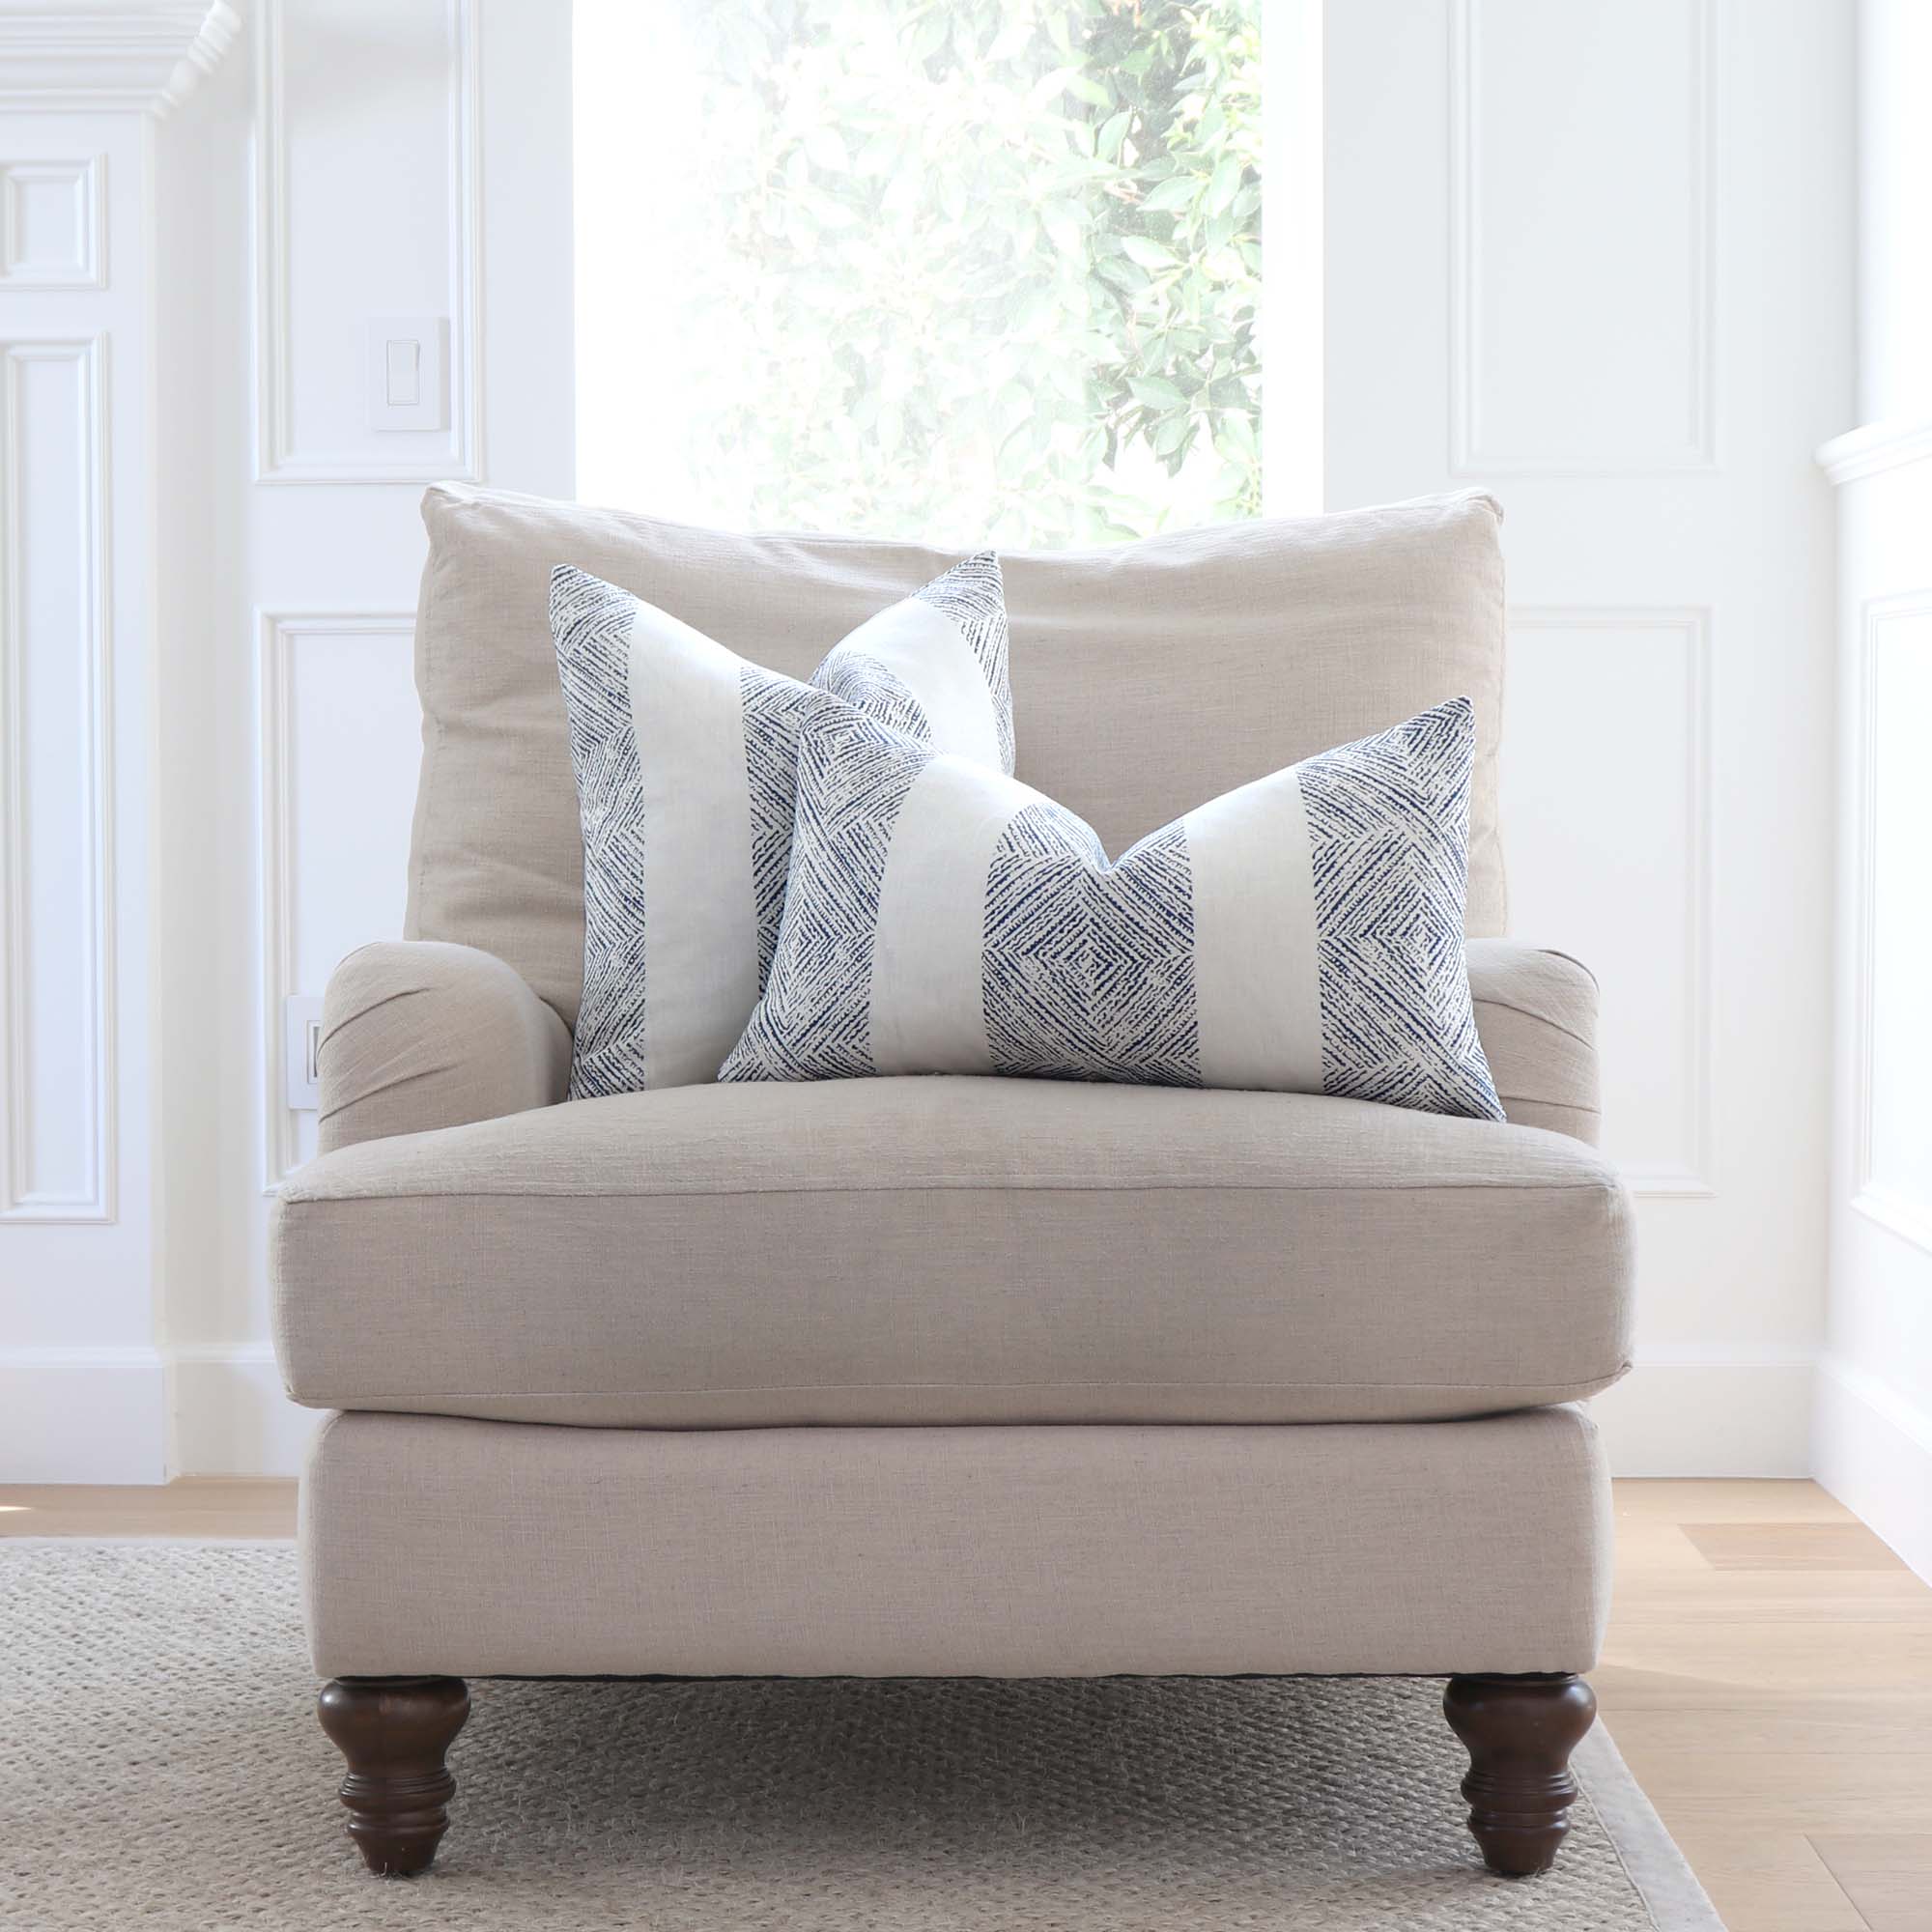 Thibaut Clipperton Stripe Navy and White Designer Luxury Linen Throw Pillow Cover on Accent Chair in Living Room